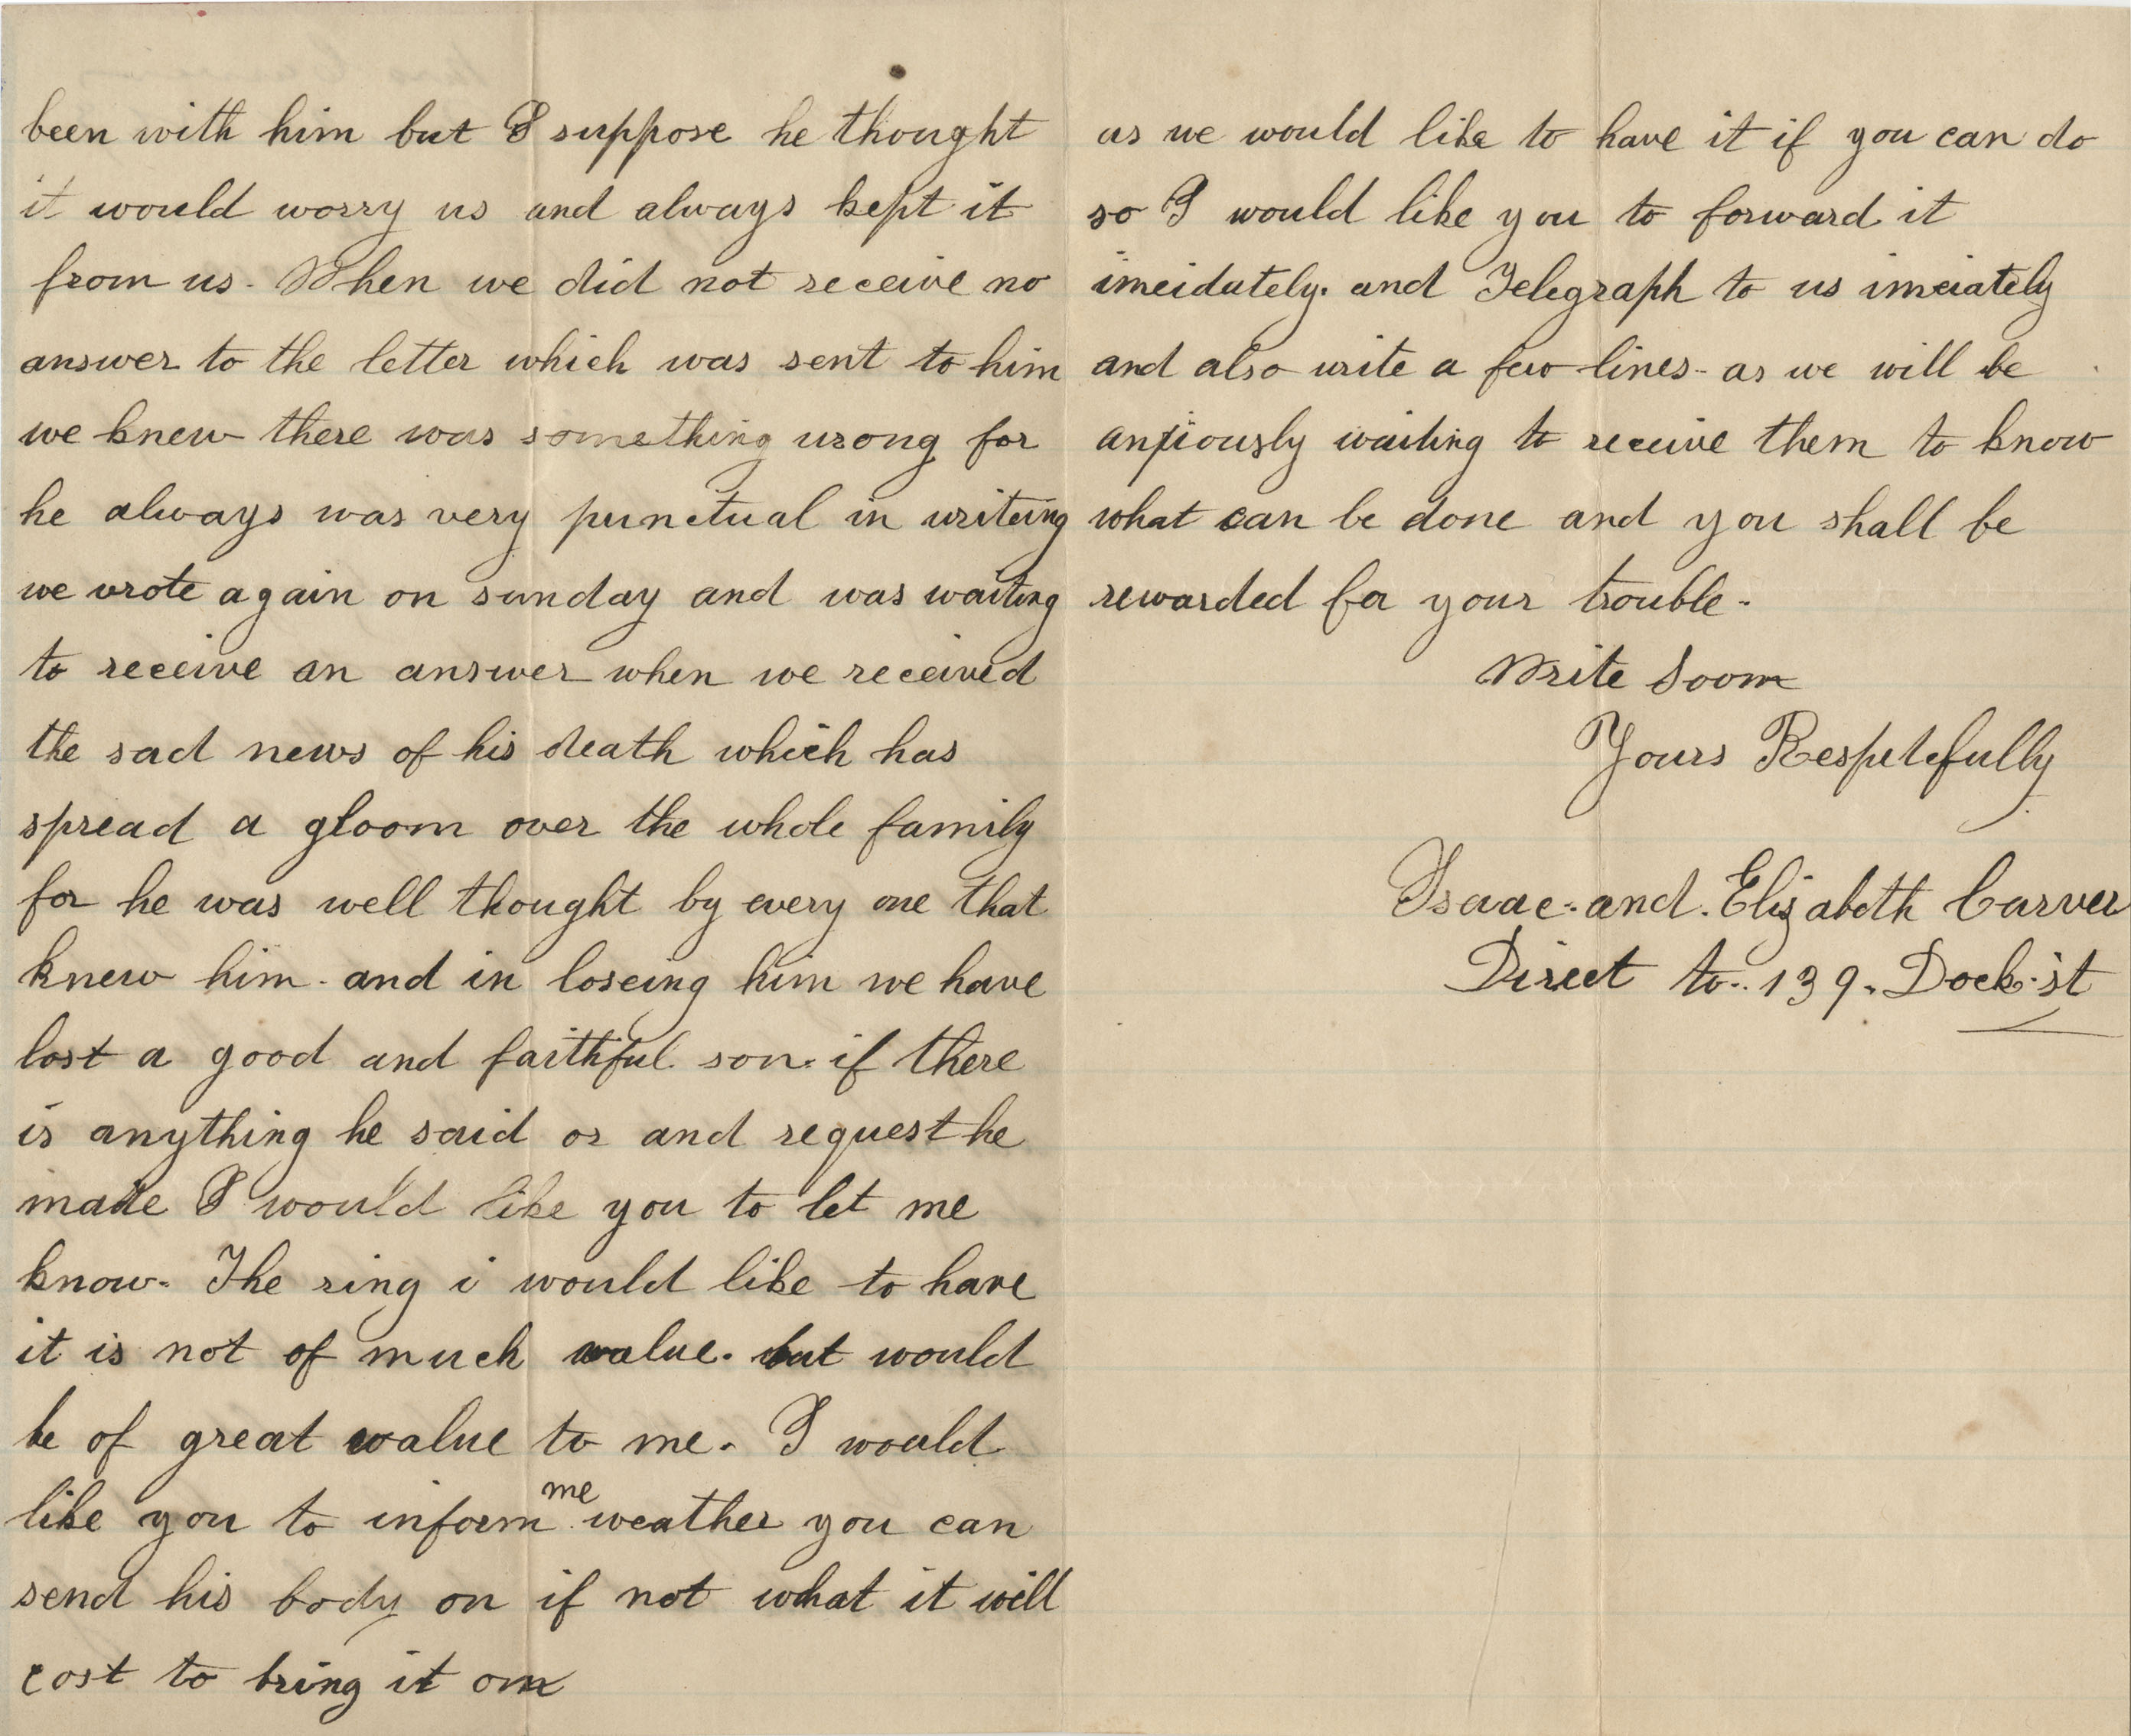 Letter from Elizabeth Carver to Edgar Knapp, 28 January 1863, pages 2-3